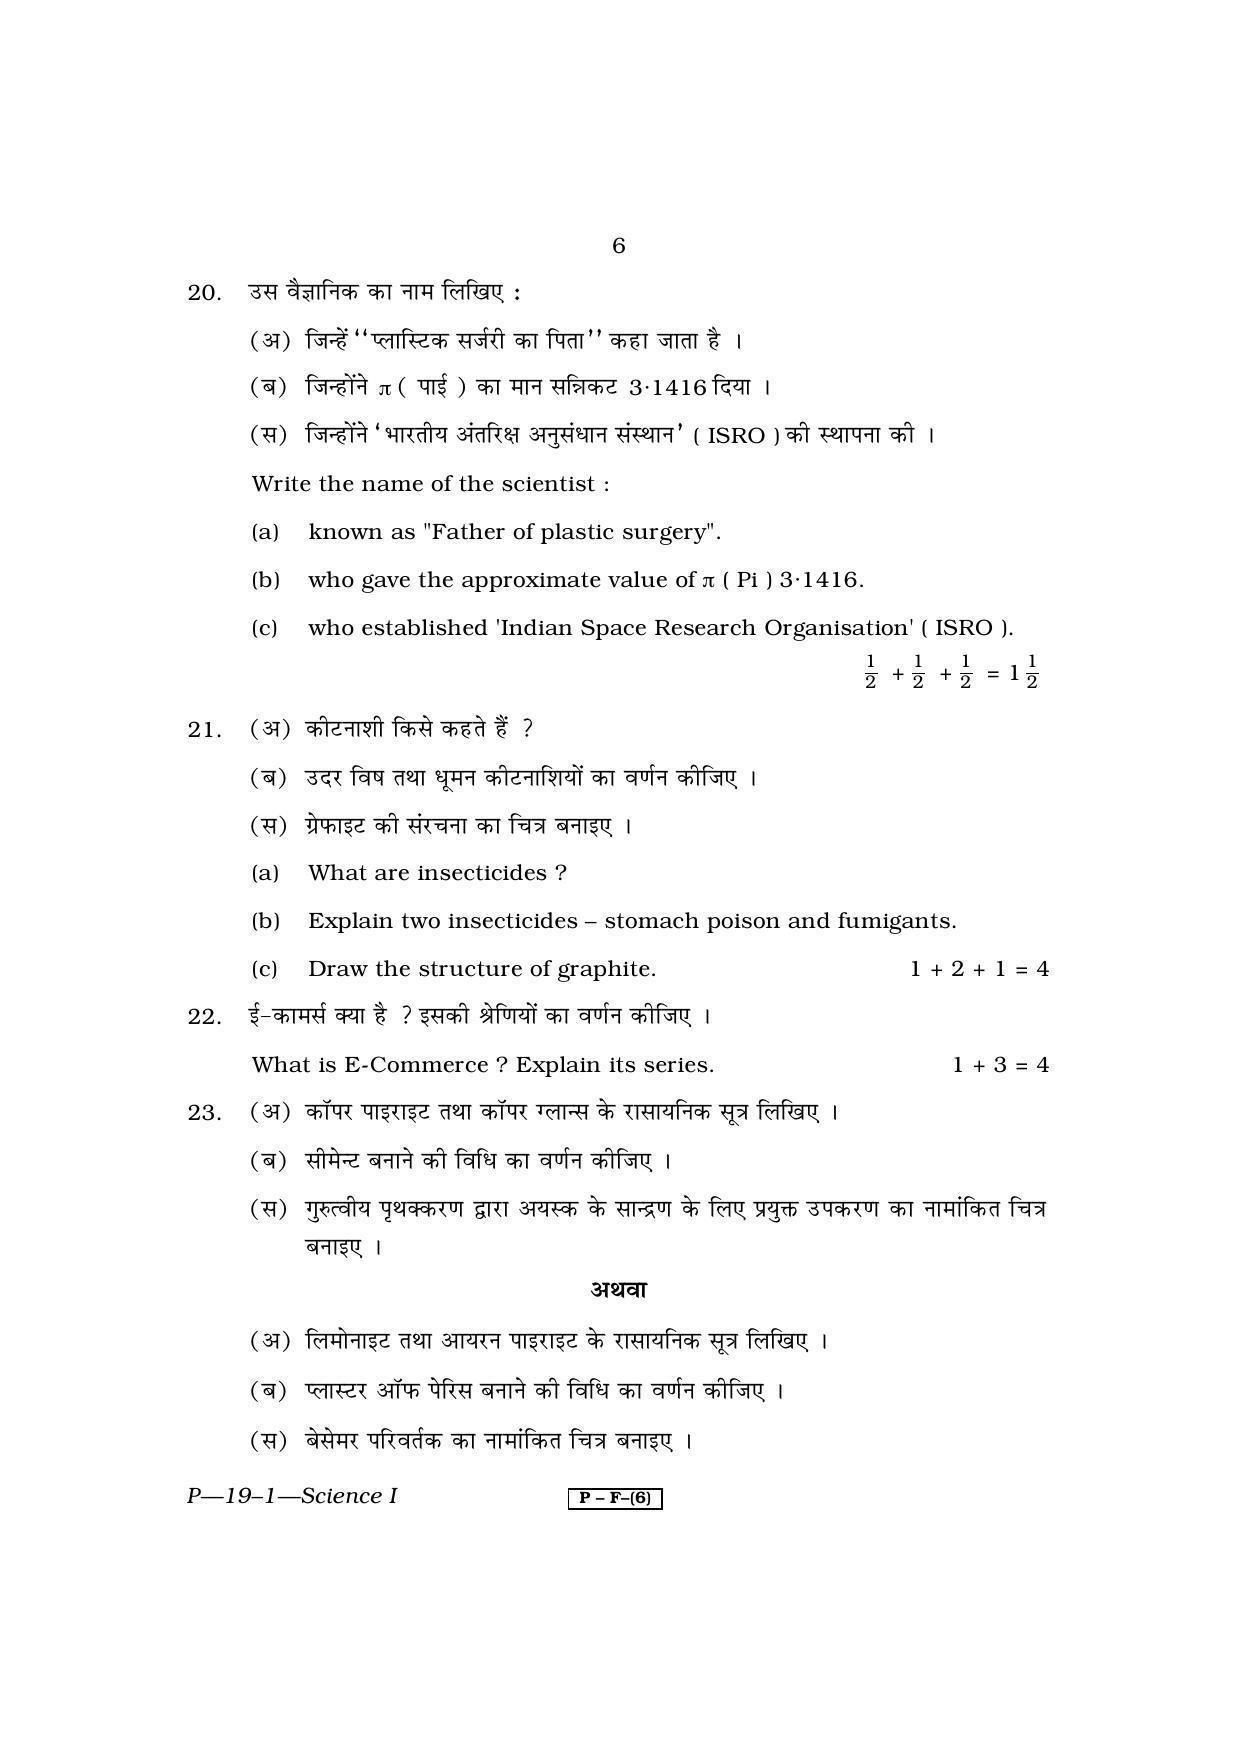 RBSE 2011 Science Praveshika Question Paper - Page 6